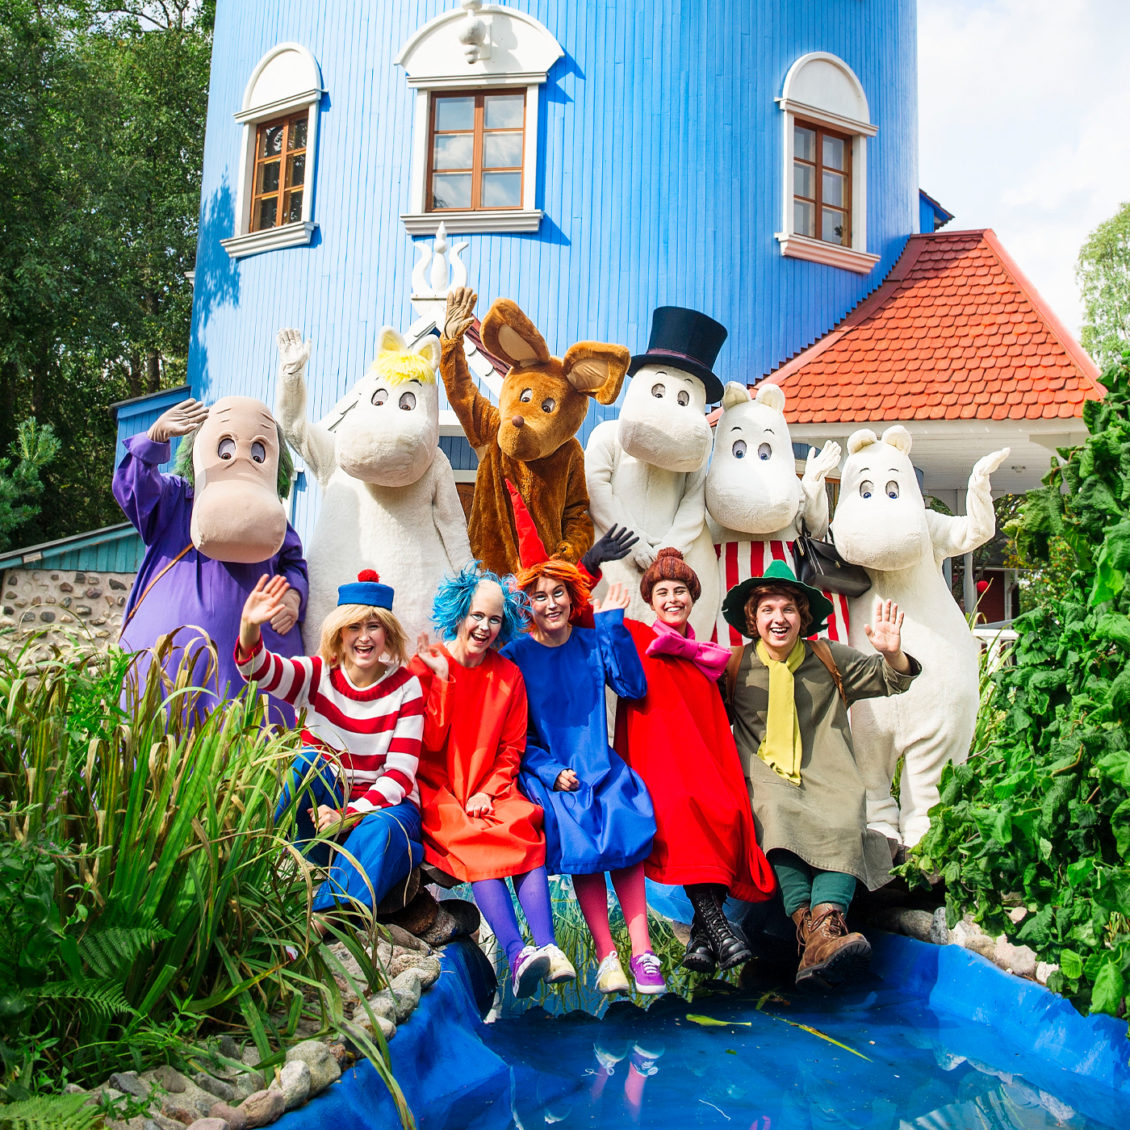 Moomin characters in front of the Moominhouse.